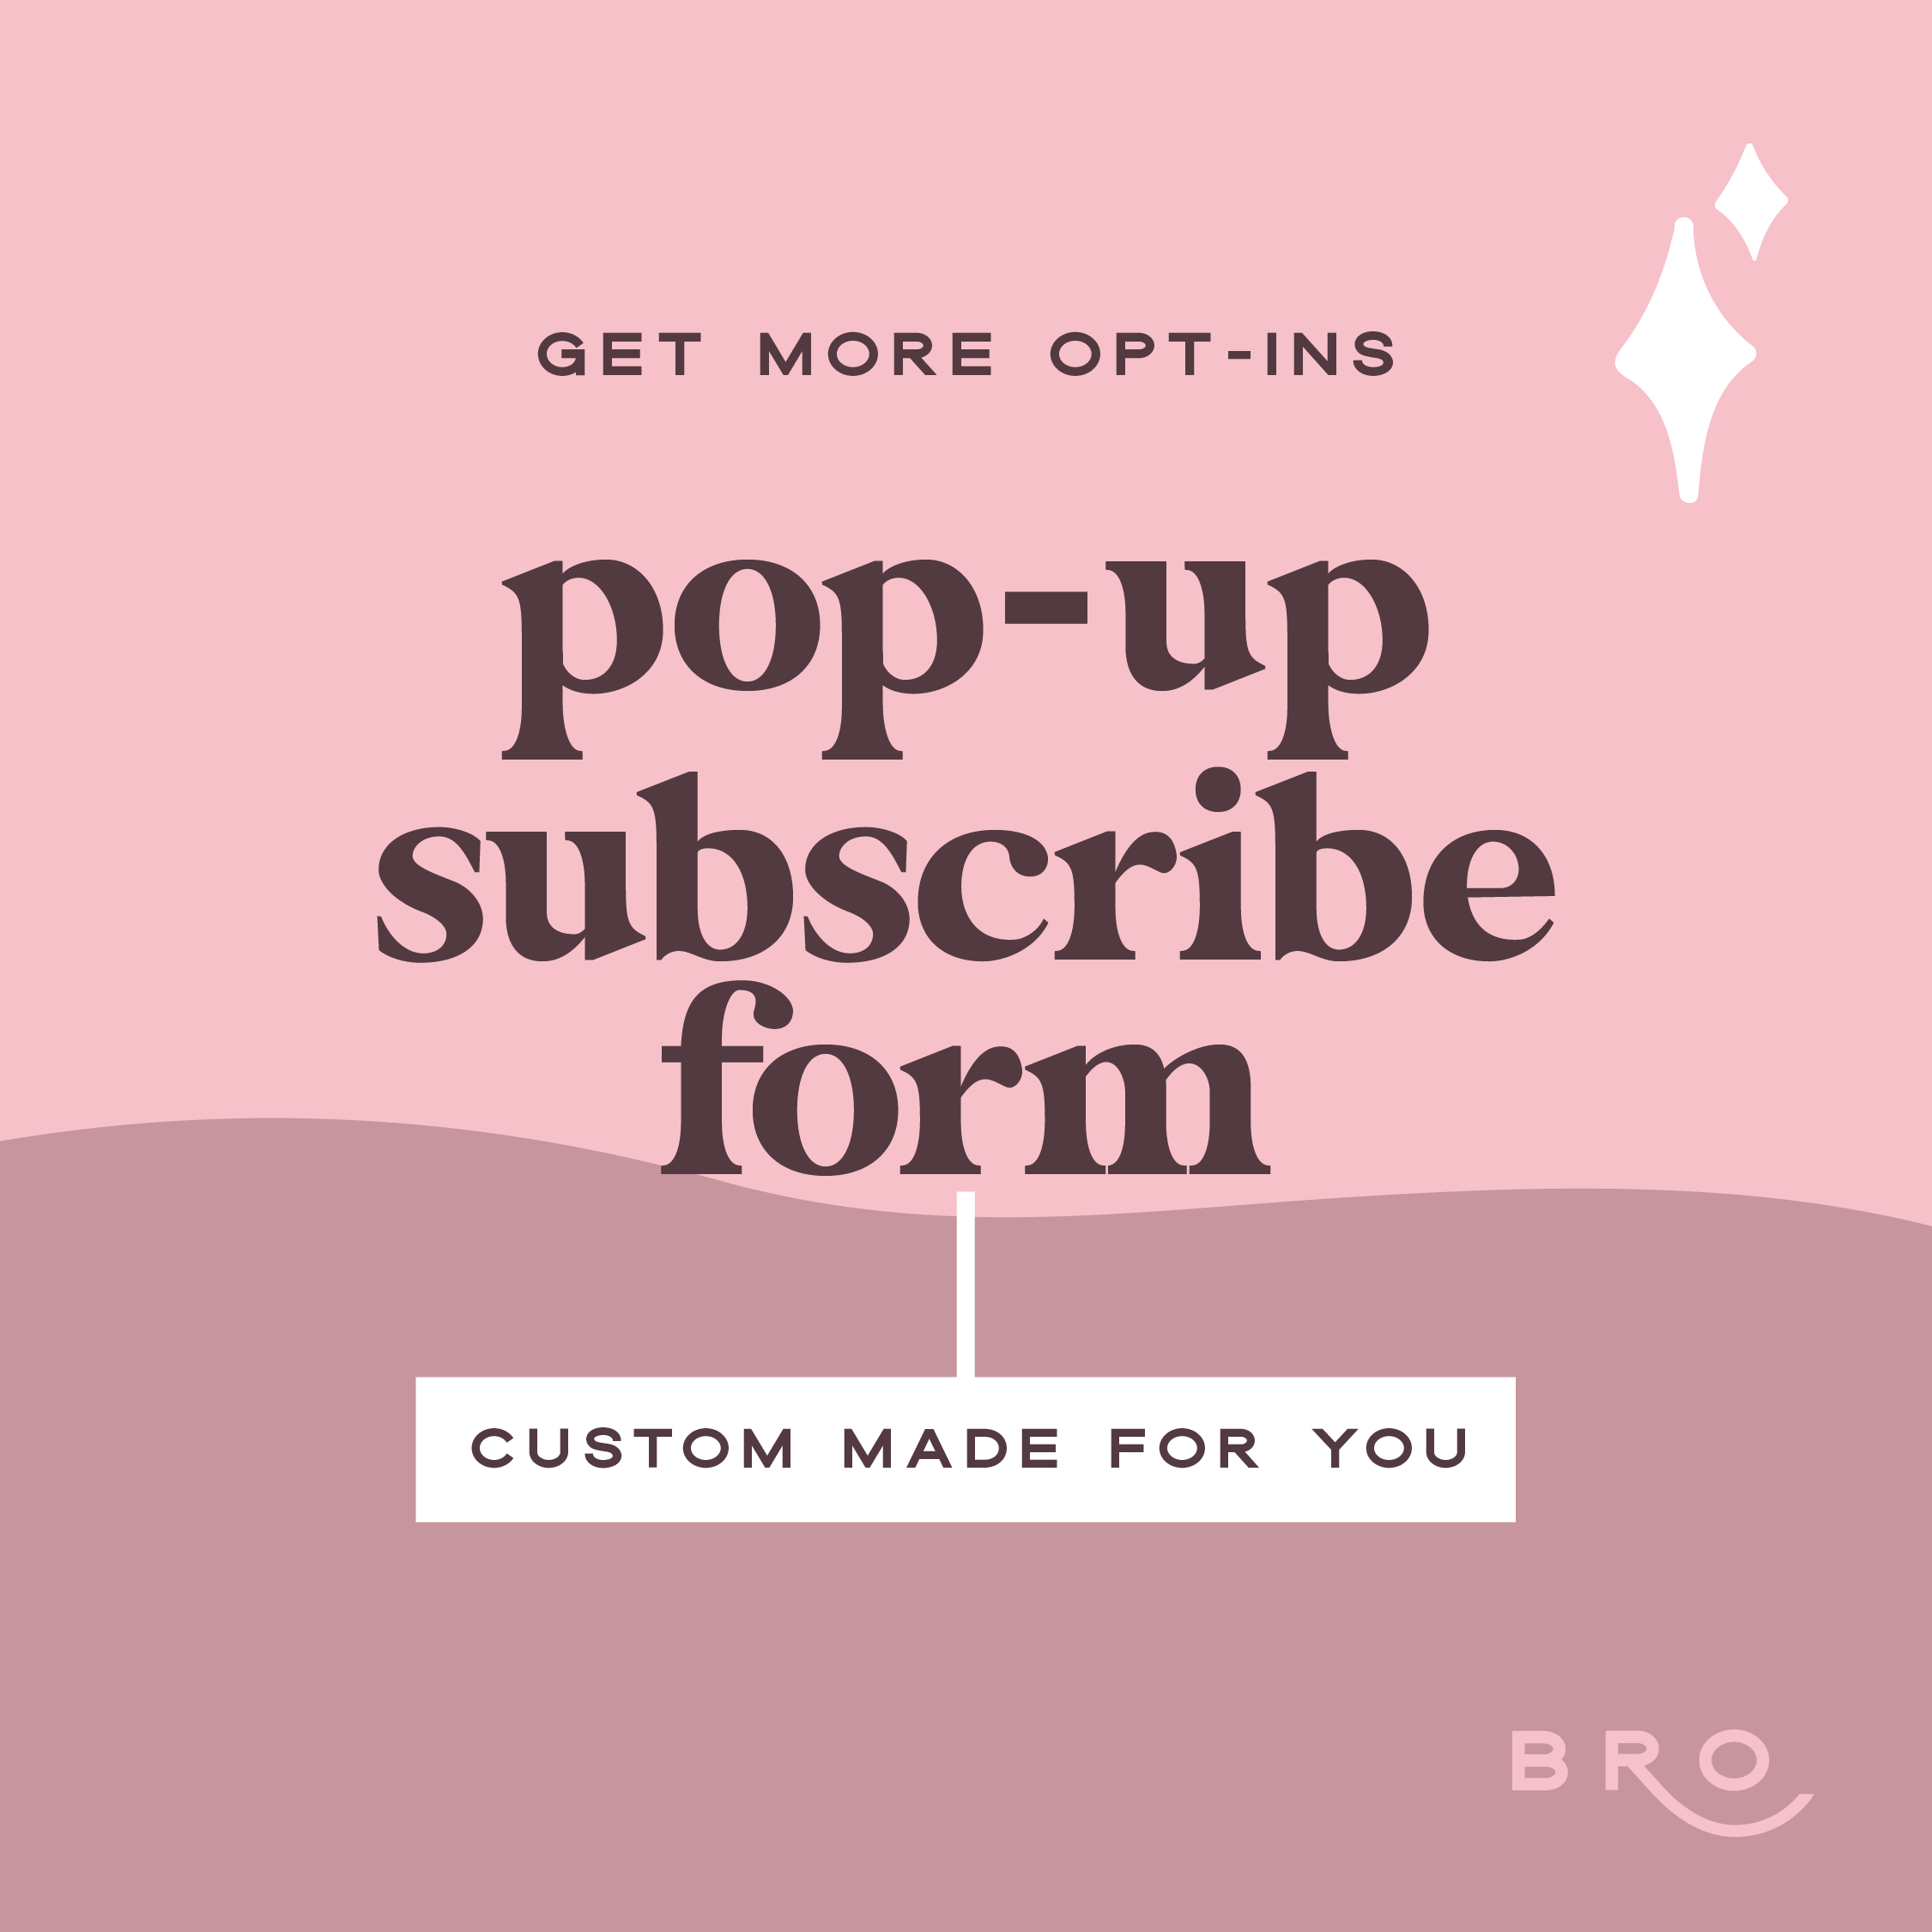 Pop-up Subscribe Form